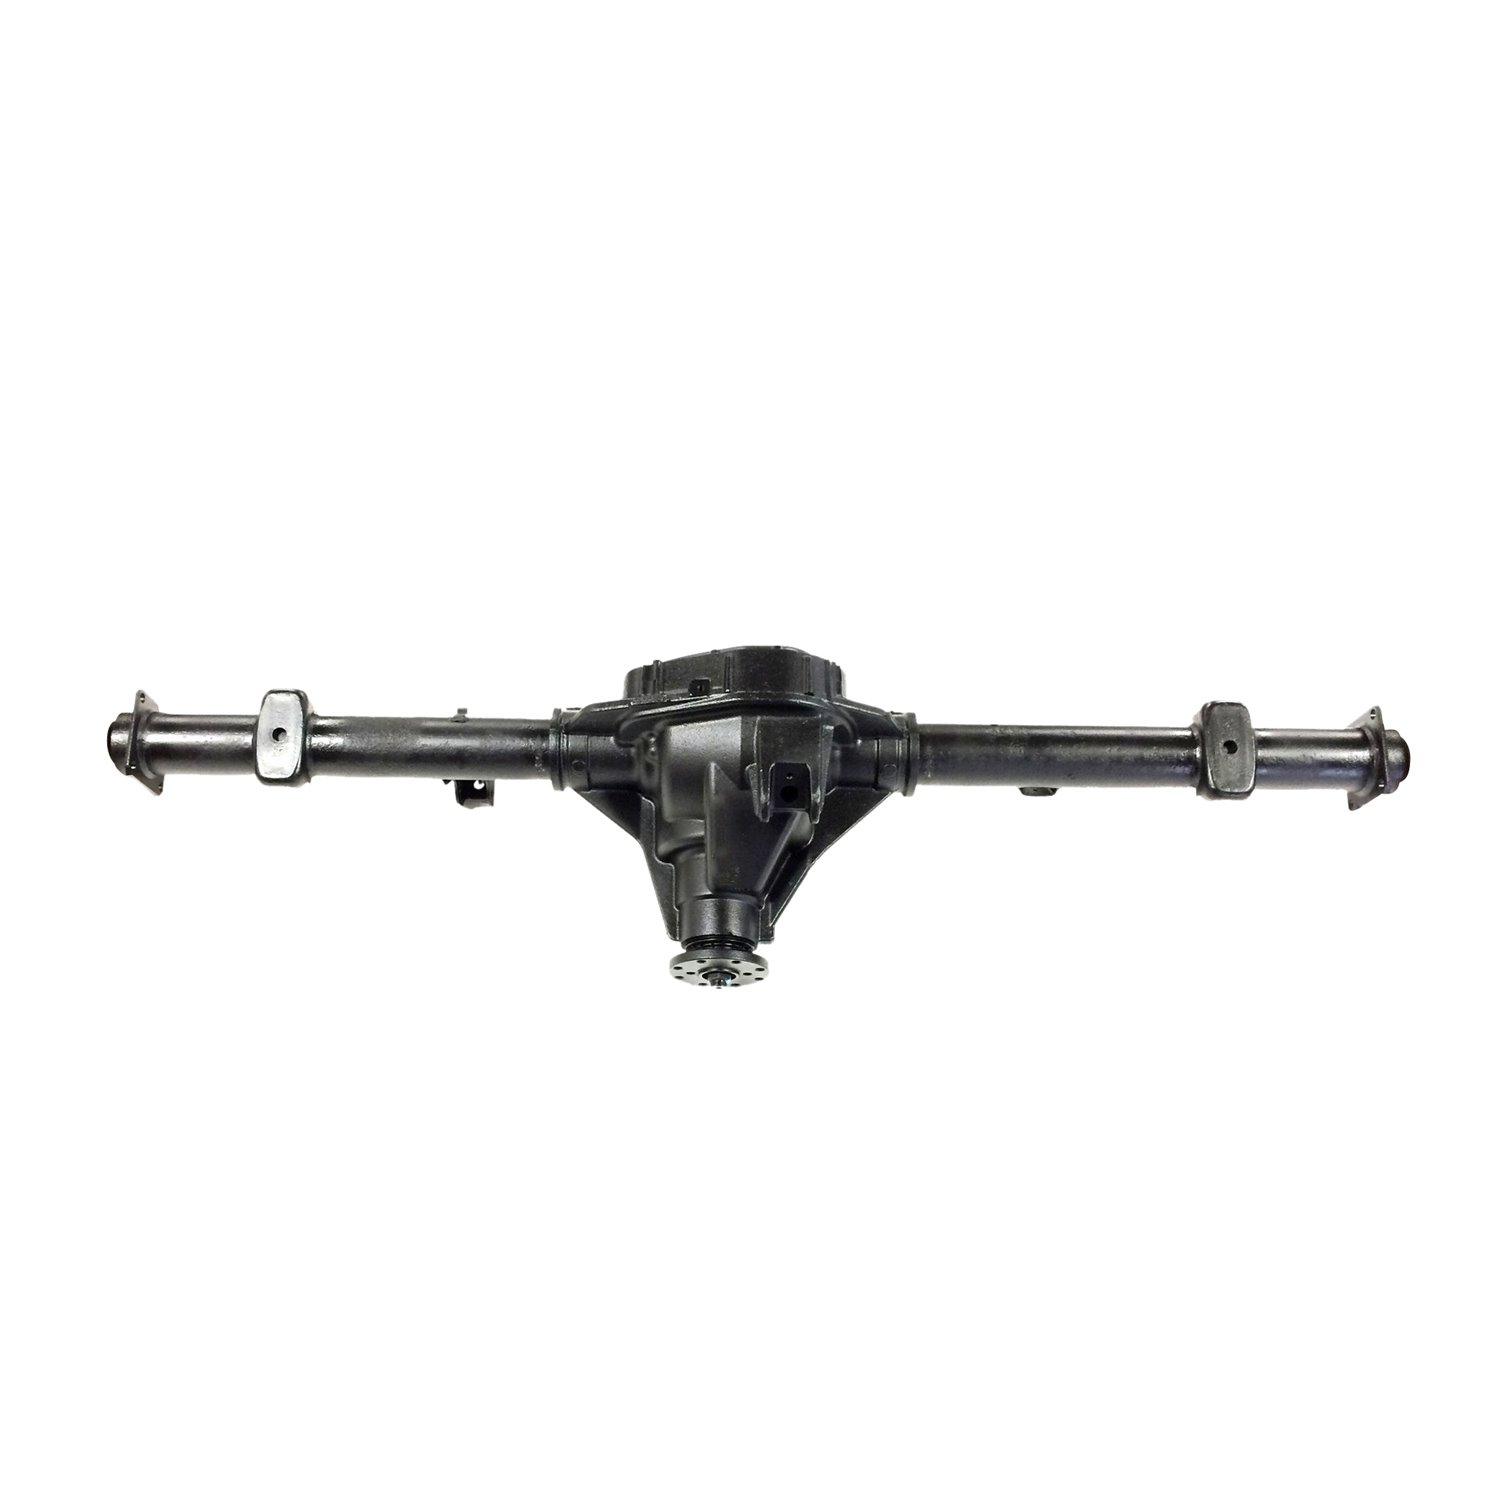 Remanufactured Complete Axle Assembly for 9.75" 99-00 F150 3.31, Rear Drum *Check Tag*